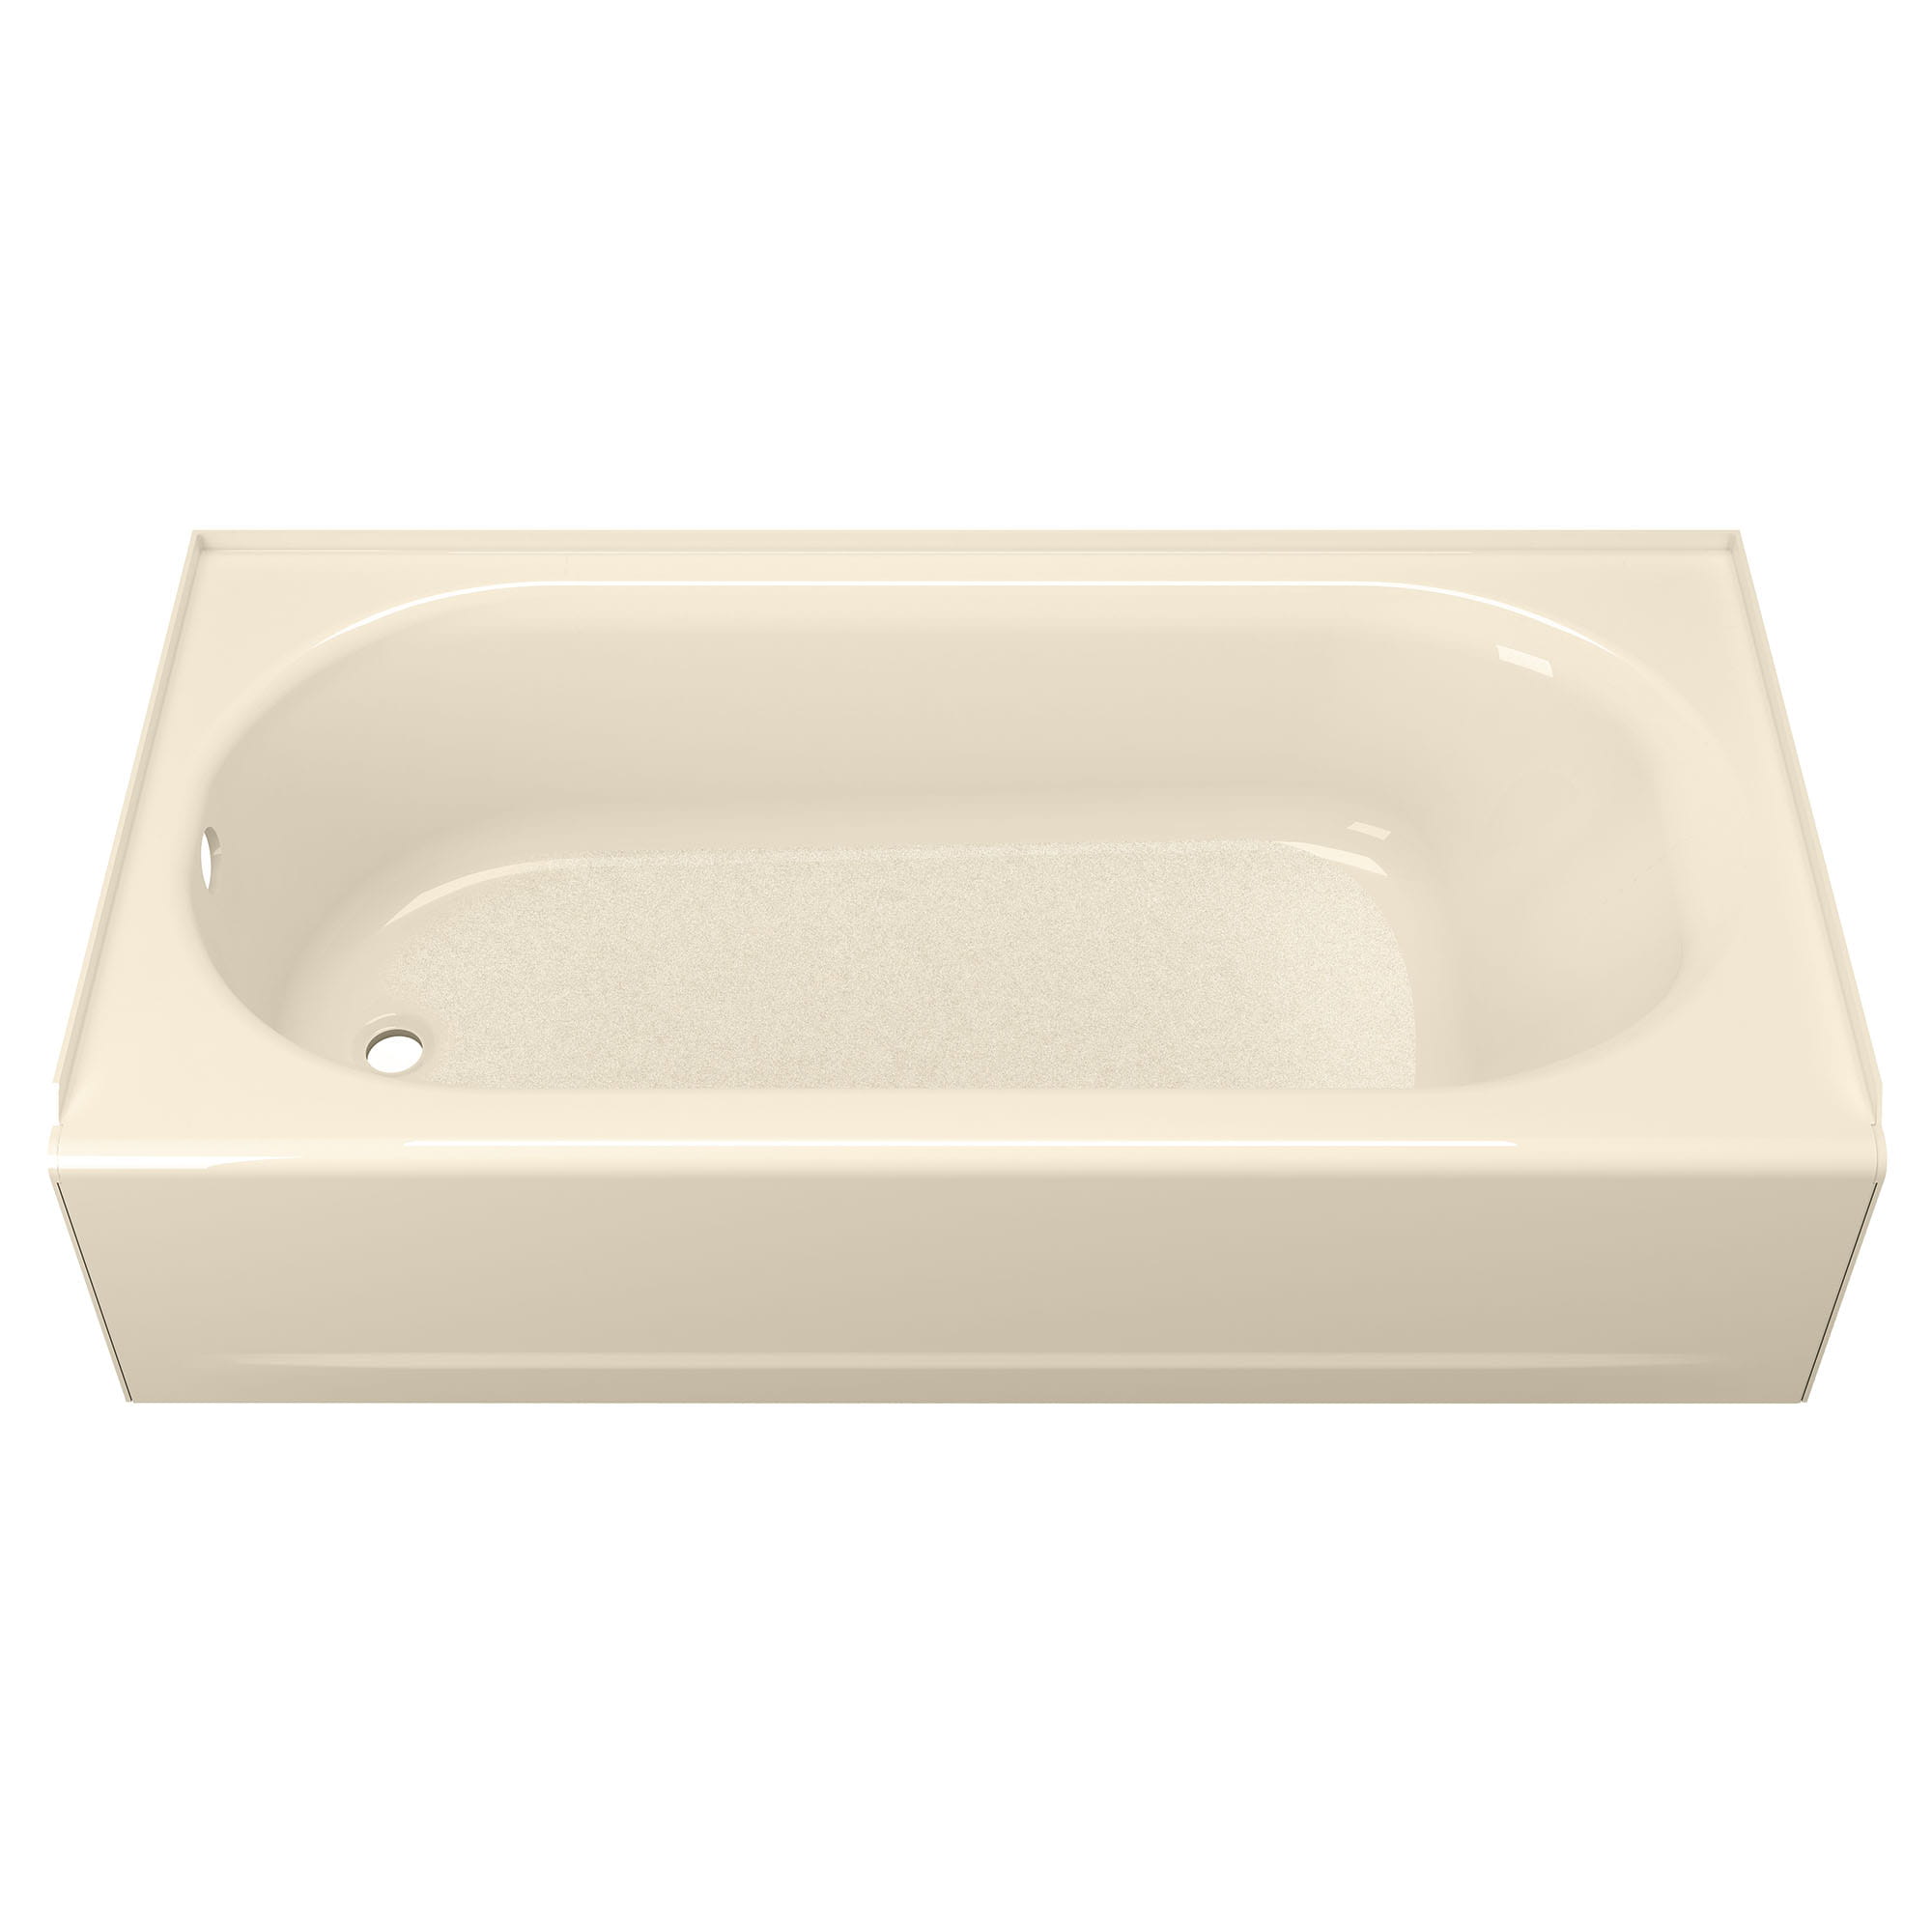 Princeton® Americast® 60 x 30-Inch Integral Apron Bathtub With Left-Hand Outlet